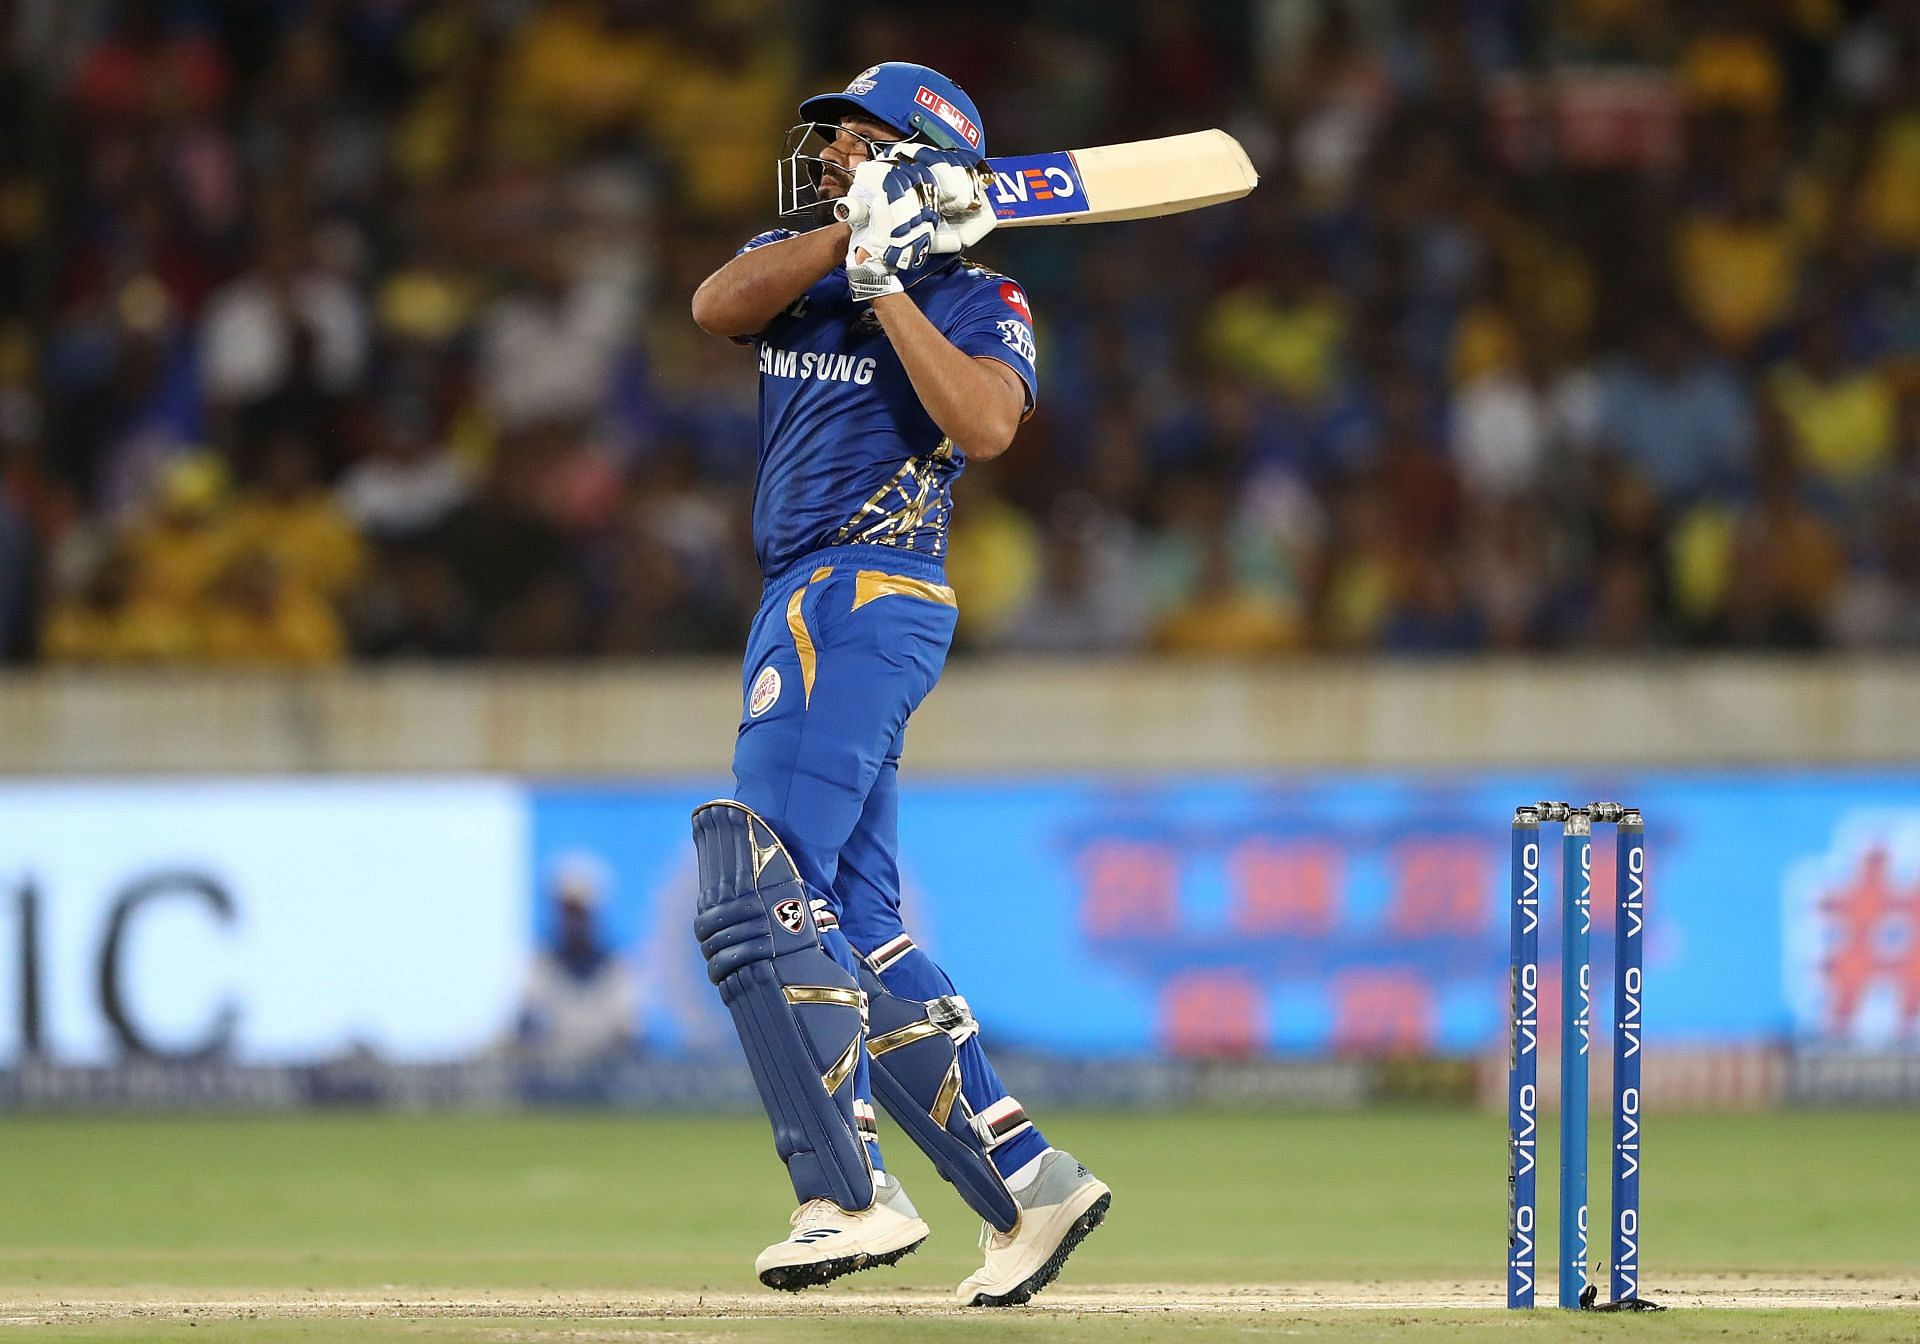 Rohit Sharma has won the most trophies in Indian Premier League history